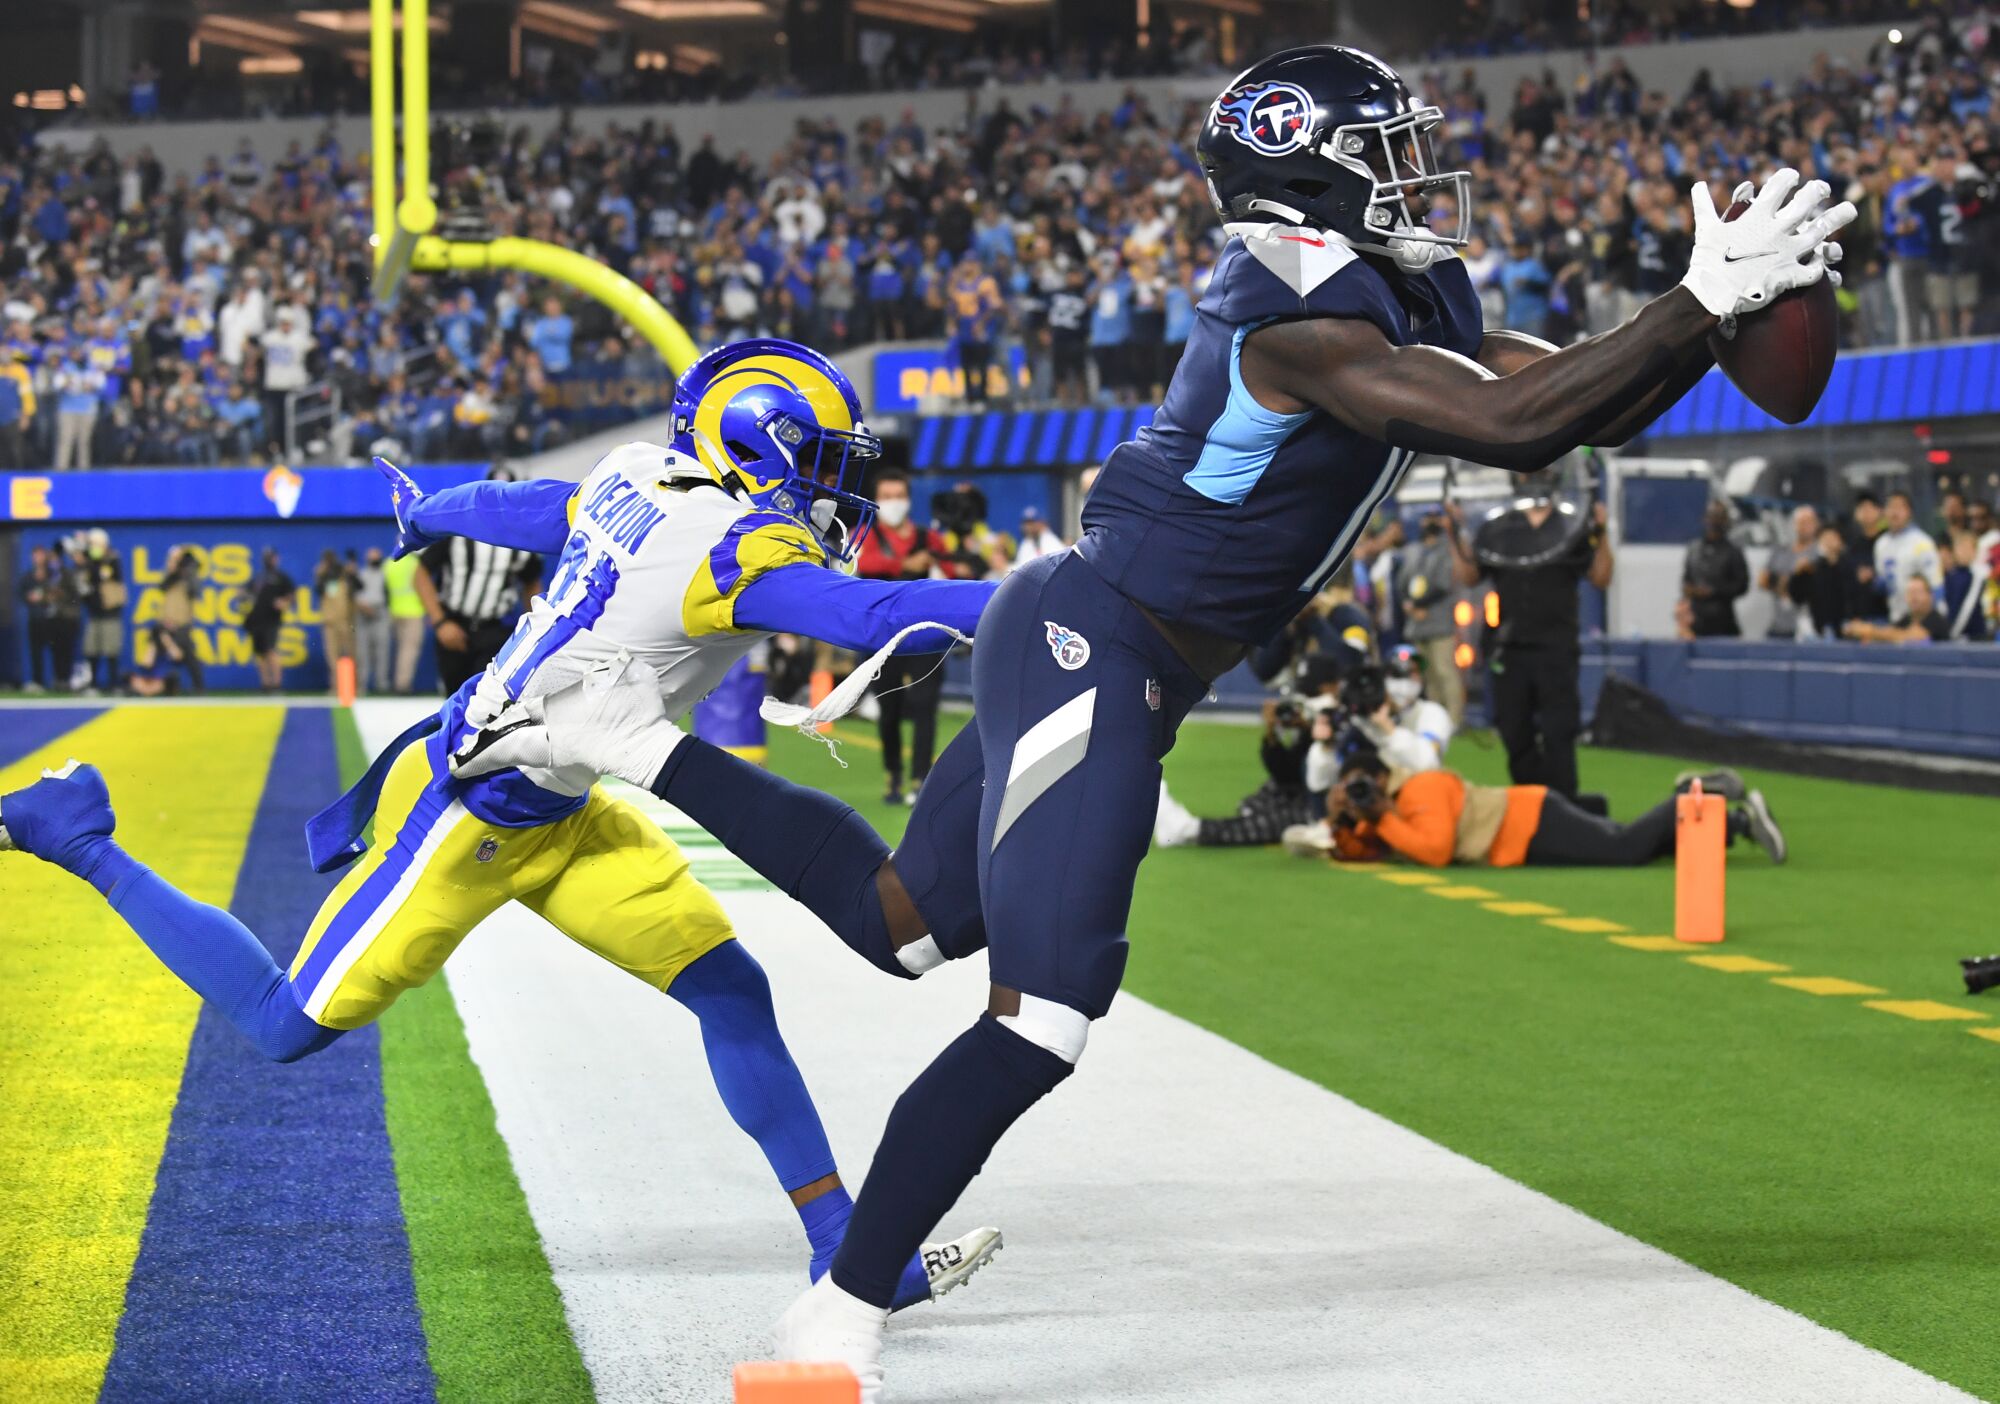 Titans receiver A.J. Brown makes a catch but is out of bounds in the end zone as Rams cornerback Dont'e Deayon defends.